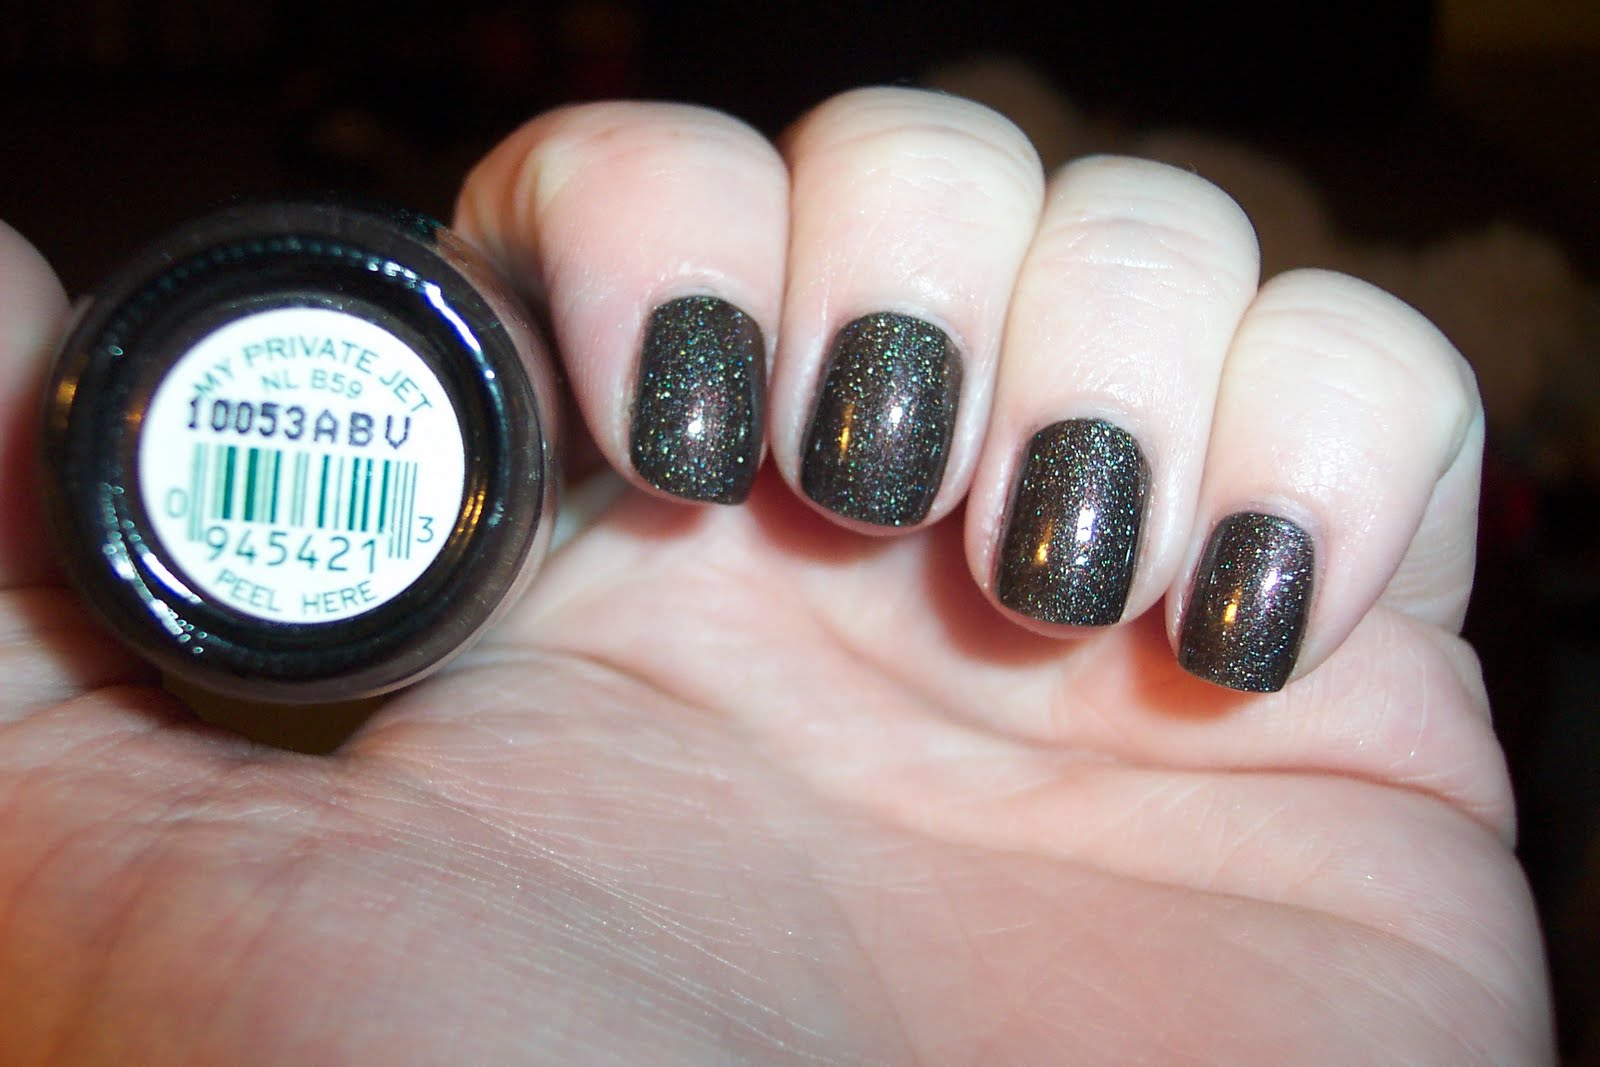 3. OPI Nail Lacquer in "My Private Jet" - wide 3